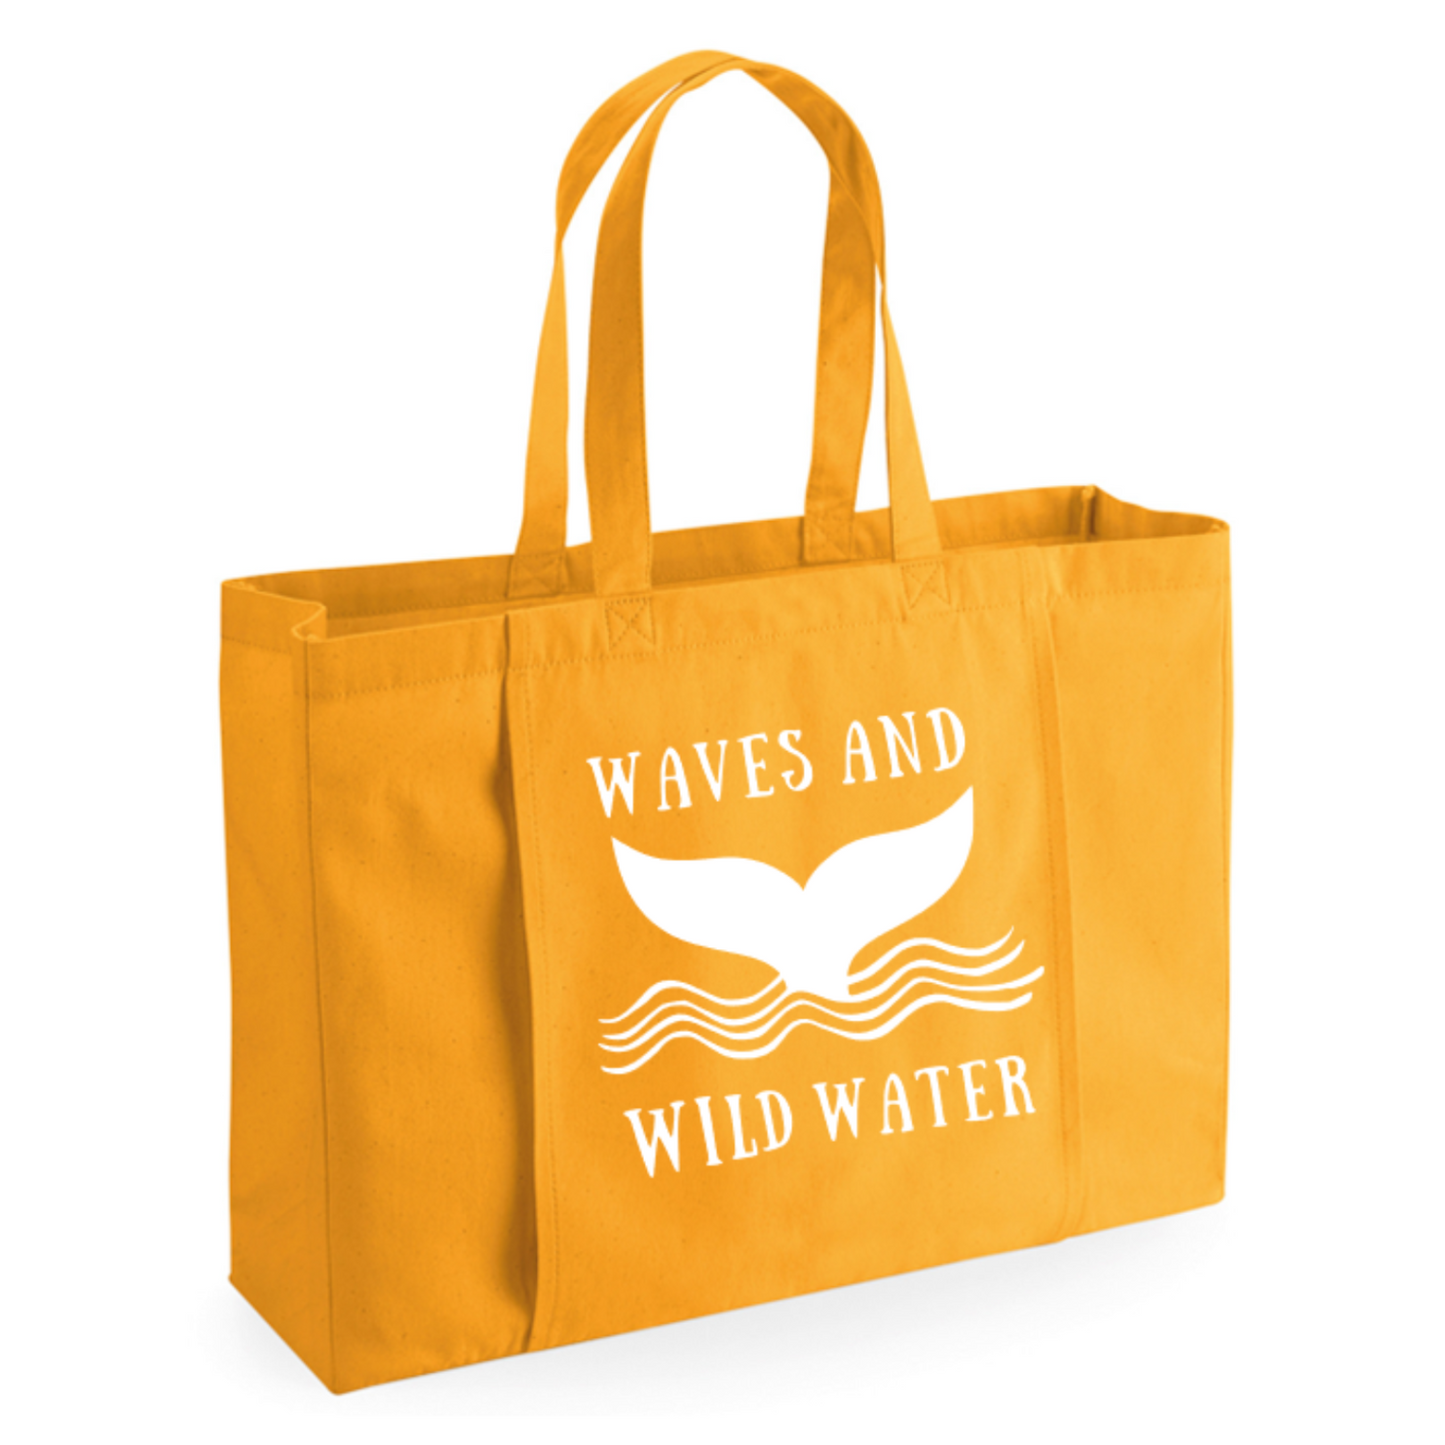 A golden yellow tote bag, with Waves & Wild Water logo on the front in white.